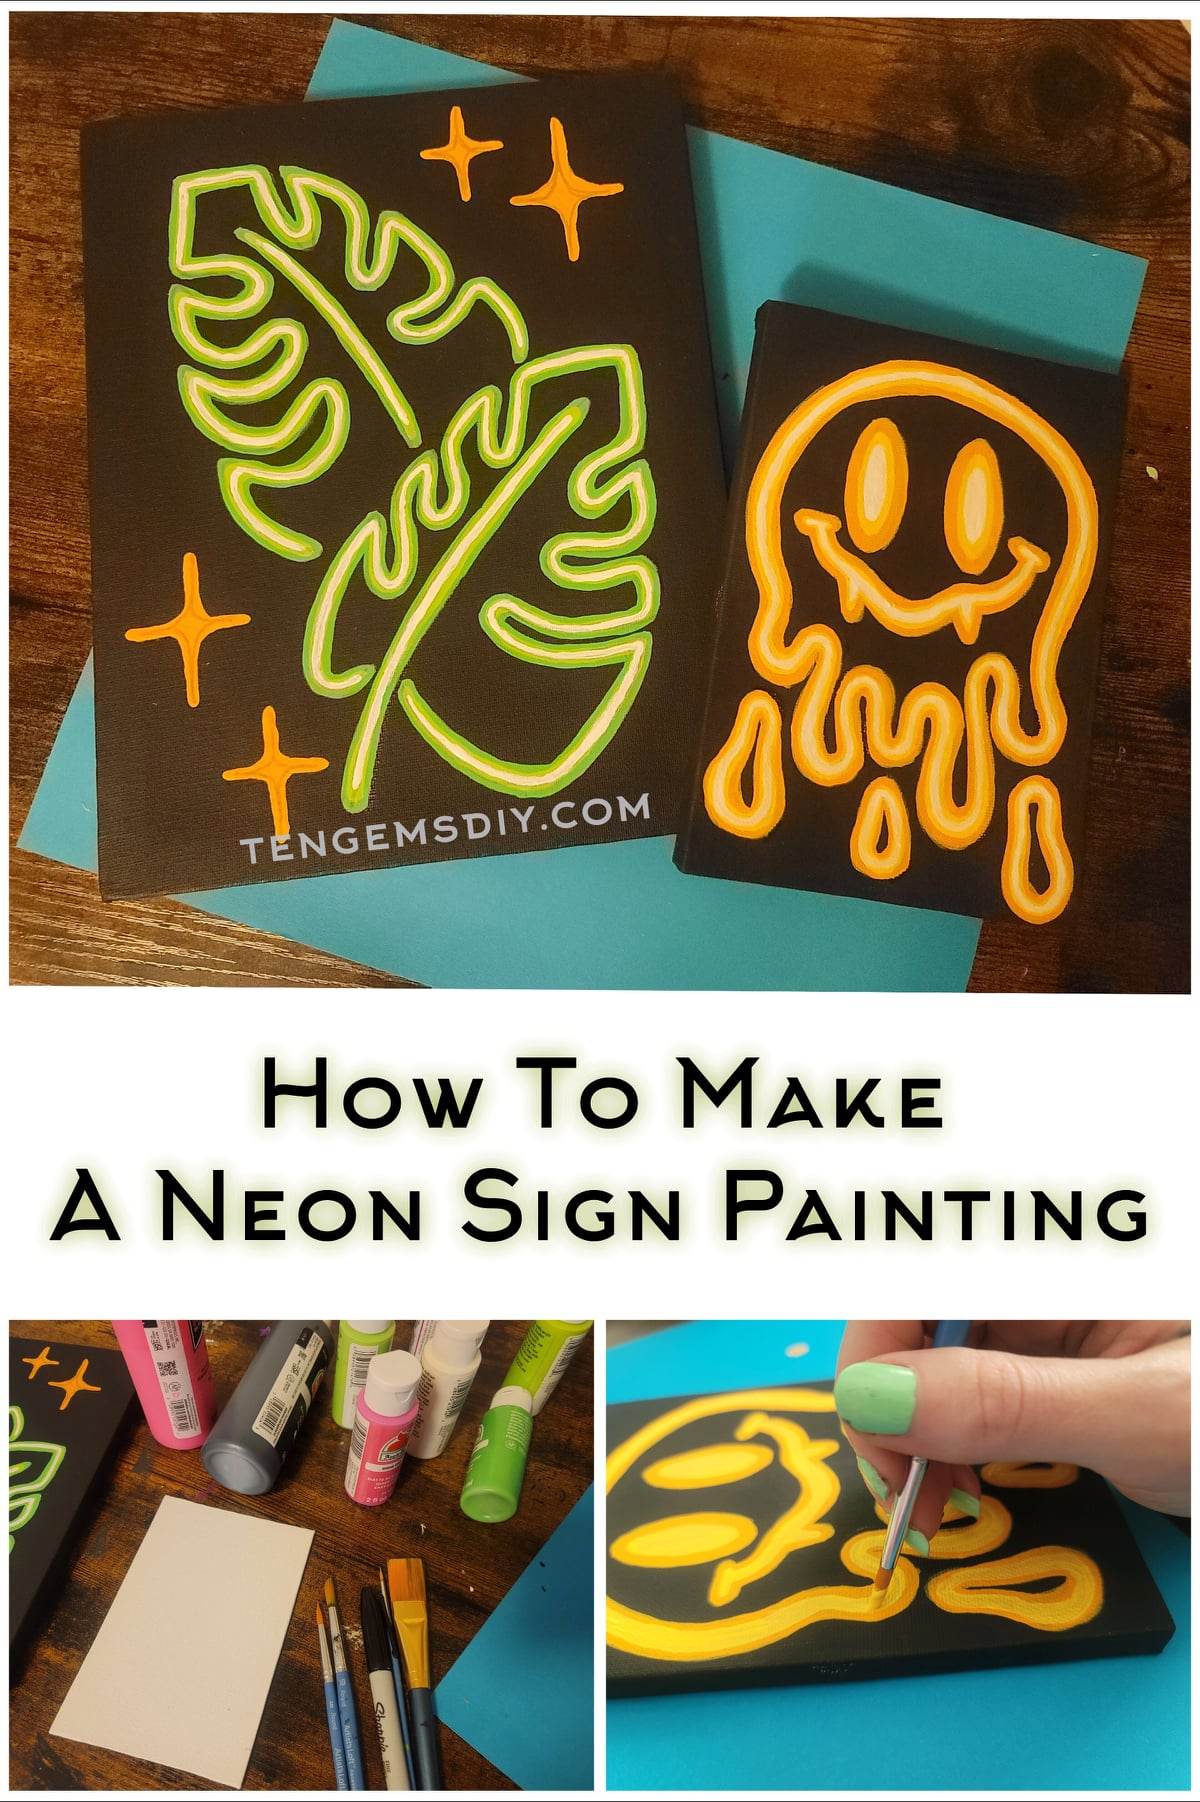 how to make a neon sign painting, diy neon sign painting, how to paint neon effect with acrylic, neon sign painting ideas, neon painting on canvas, canvas painting ideas, neon sign painting easy, neon sign effect painting, fake neon sign diy, crafts for adults, trending crafts, optical illusion paintings, easy painting ideas, painting with black canvas, smiley face art, plant art, mostera, painting